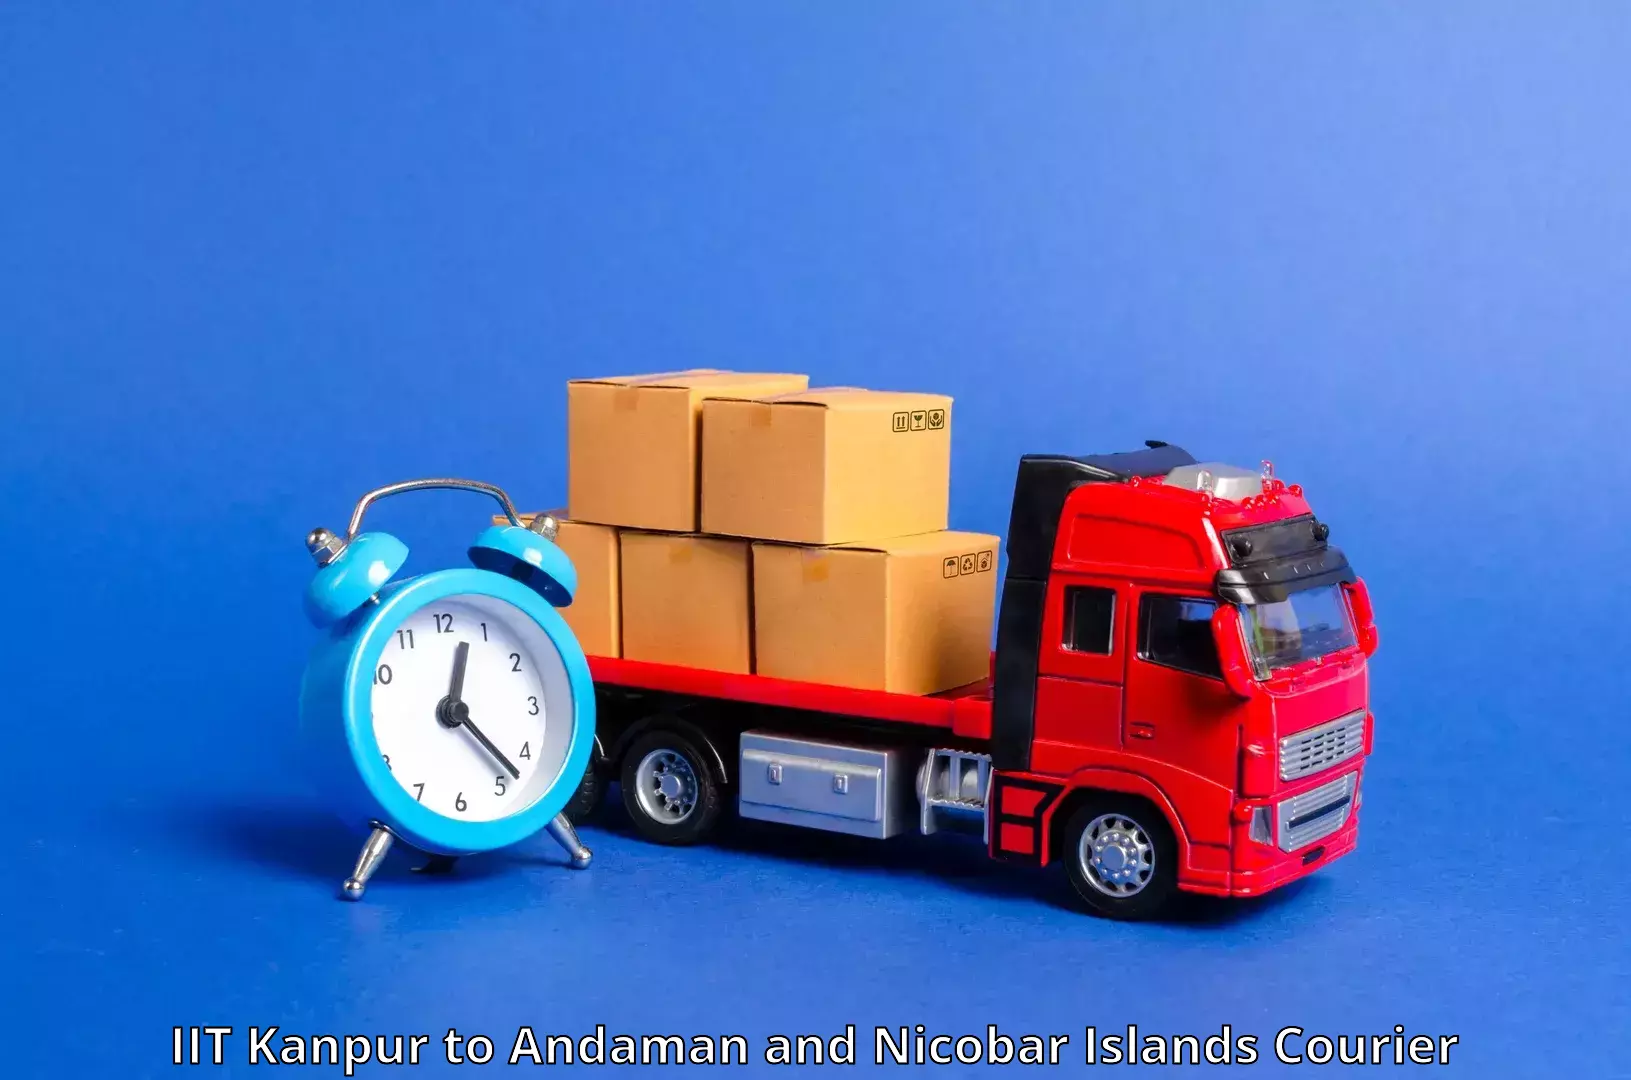 Reliable courier services in IIT Kanpur to Port Blair